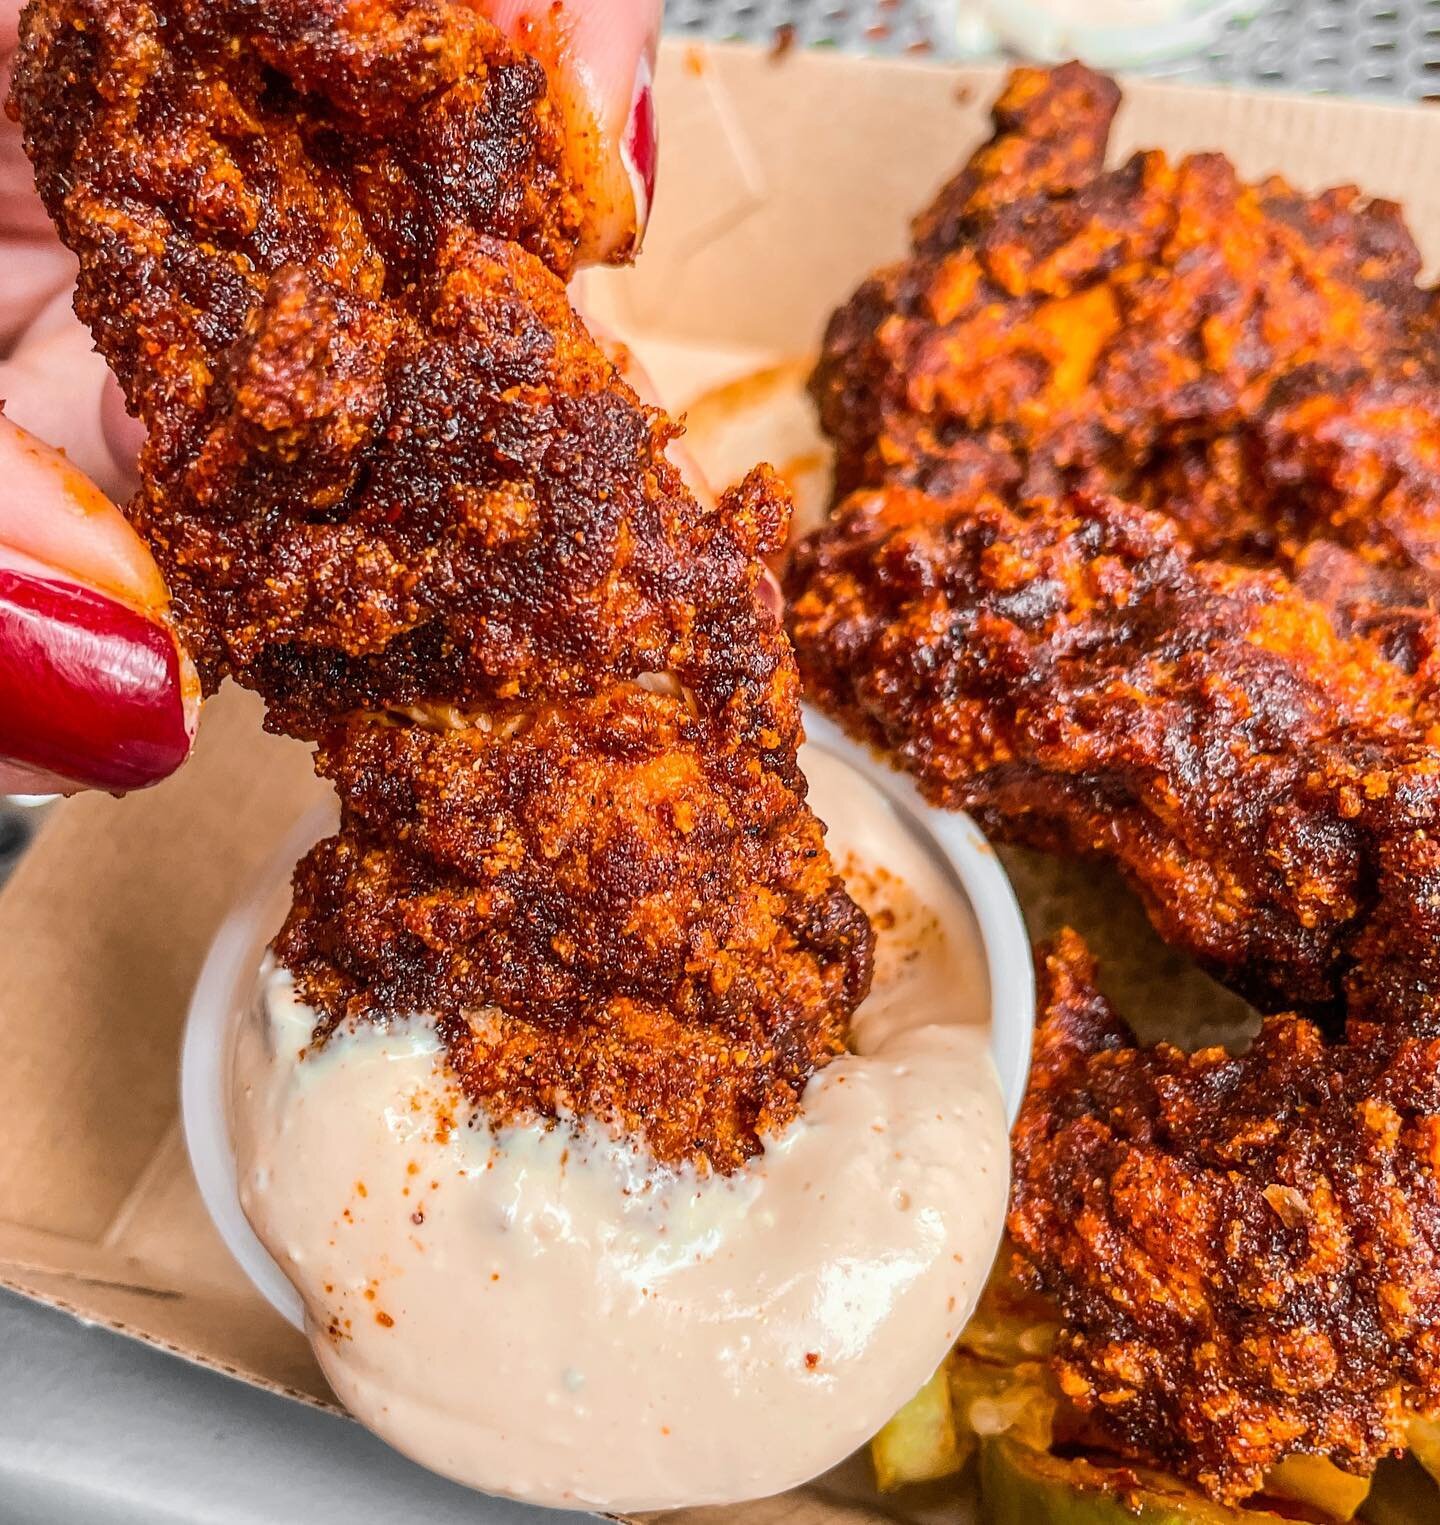 Petition for a temporary switch from Taco Tuesday to Tender Tuesday.
📍: @jonandandys 
.
.
.
.
.
.
#chickentenders #hotchicken #spicychicken #chickennuggets